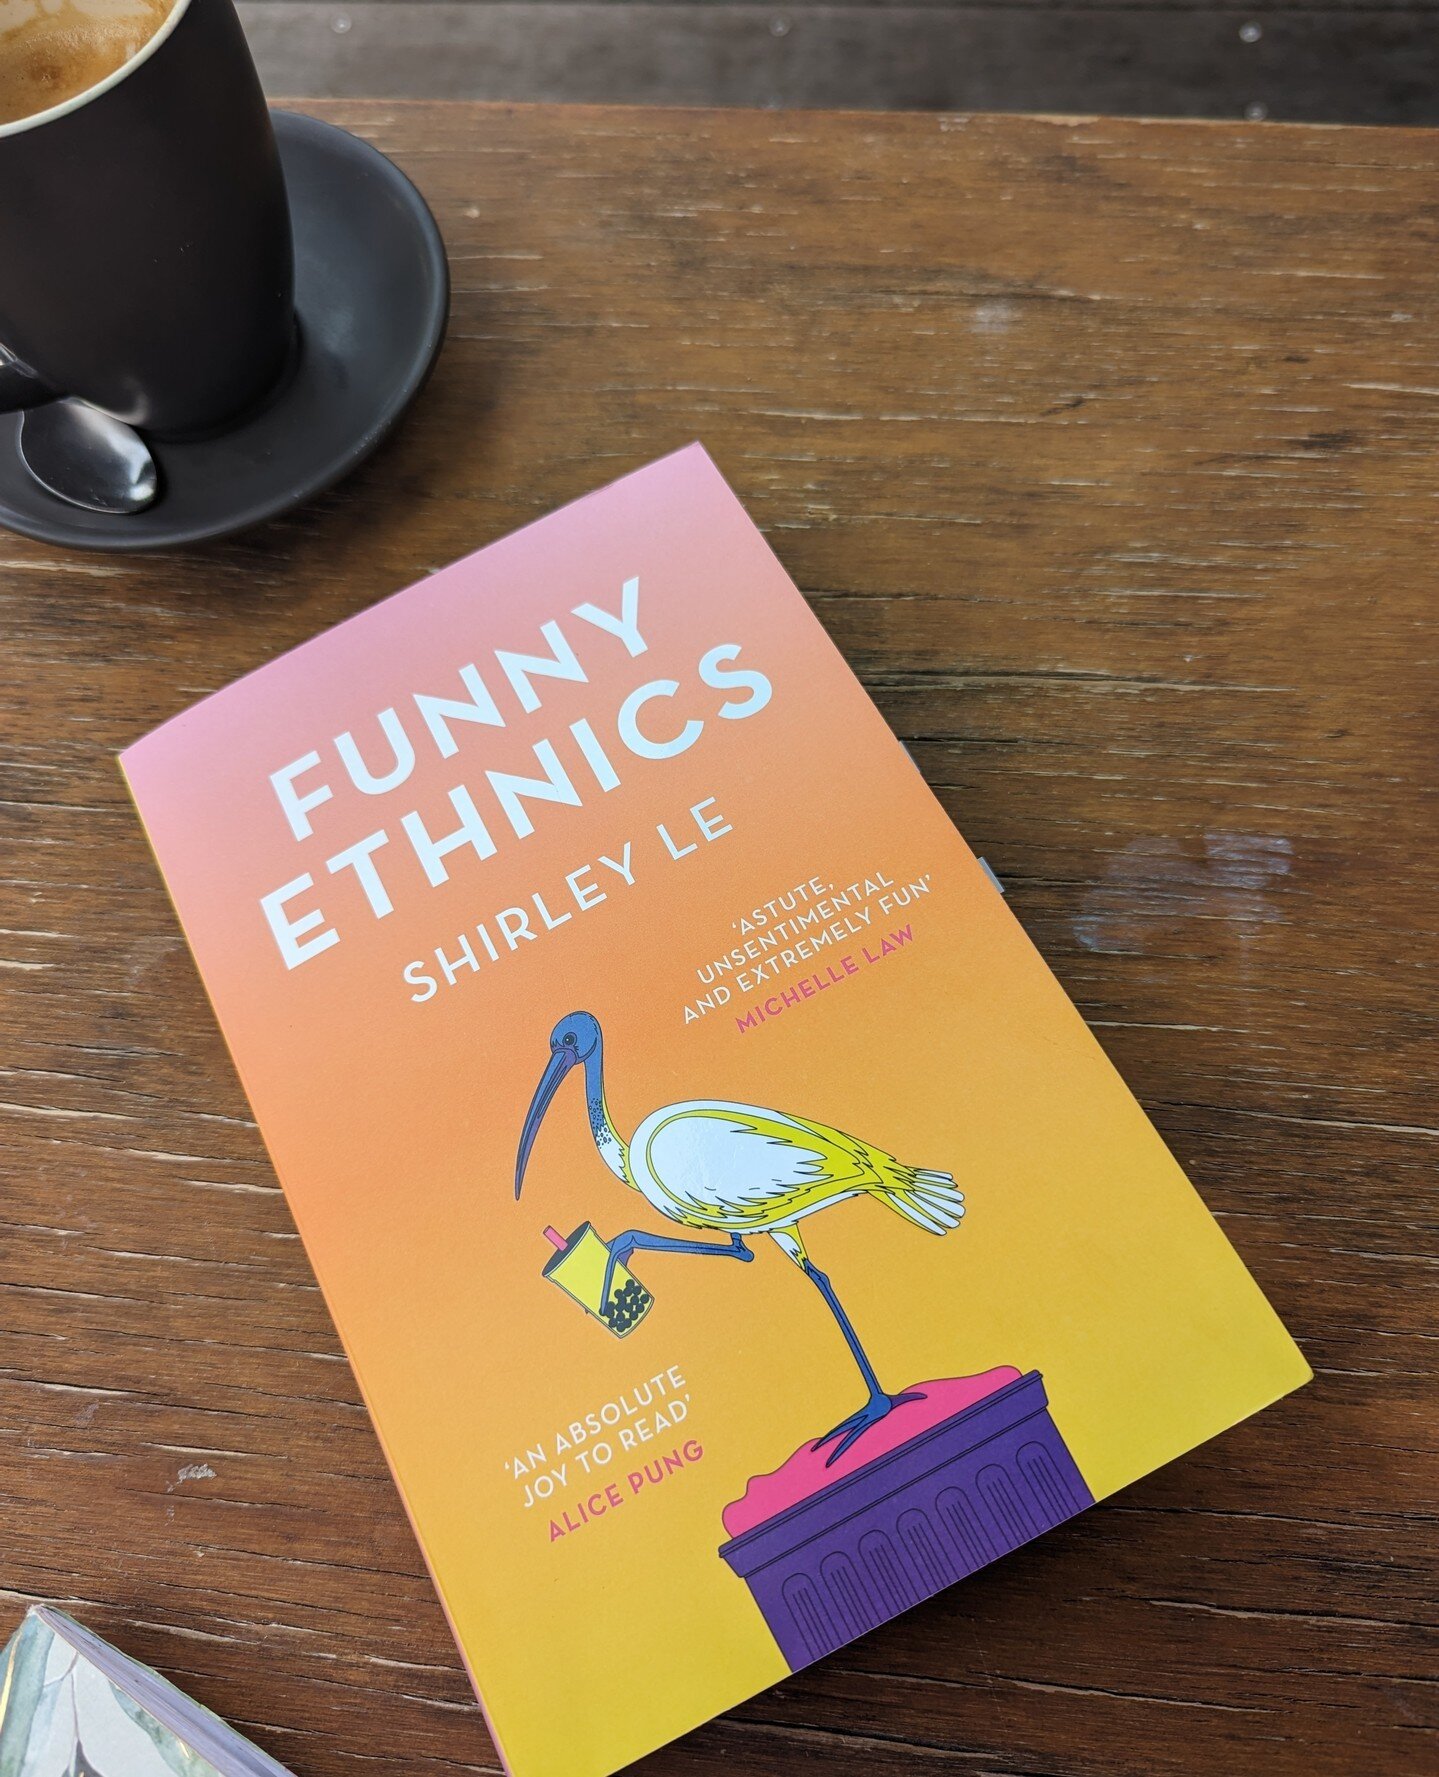 'Funny Ethnics' by Shirley Le, and 'Another Australia' edited by Winnie Dunn (@sweatshop.ws) published by Affirm Press @affirmpress ⁠
⁠
The Ibis is a much maligned bird that I hold a lot of affection for (despite coming from a high school where IBIS 